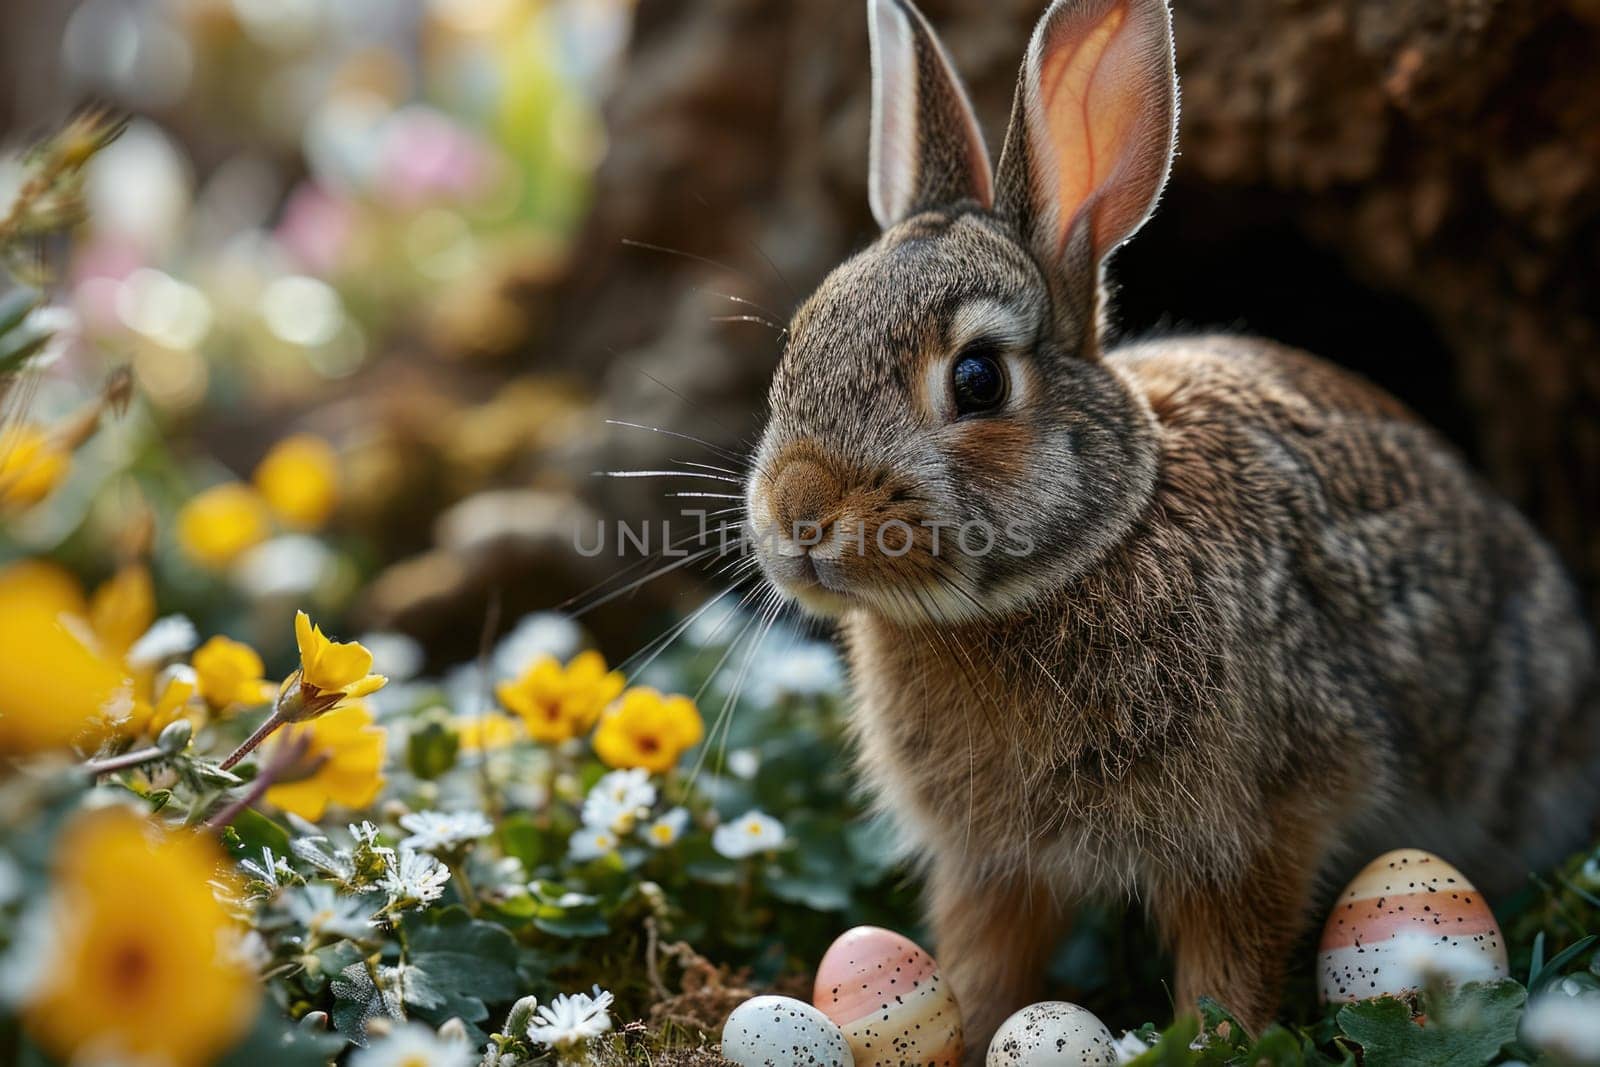 A rabbit in the middle of a spring forest, surrounded by Easter eggs and bright spring flowers, creates a warm and festive atmosphere of a spring morning.